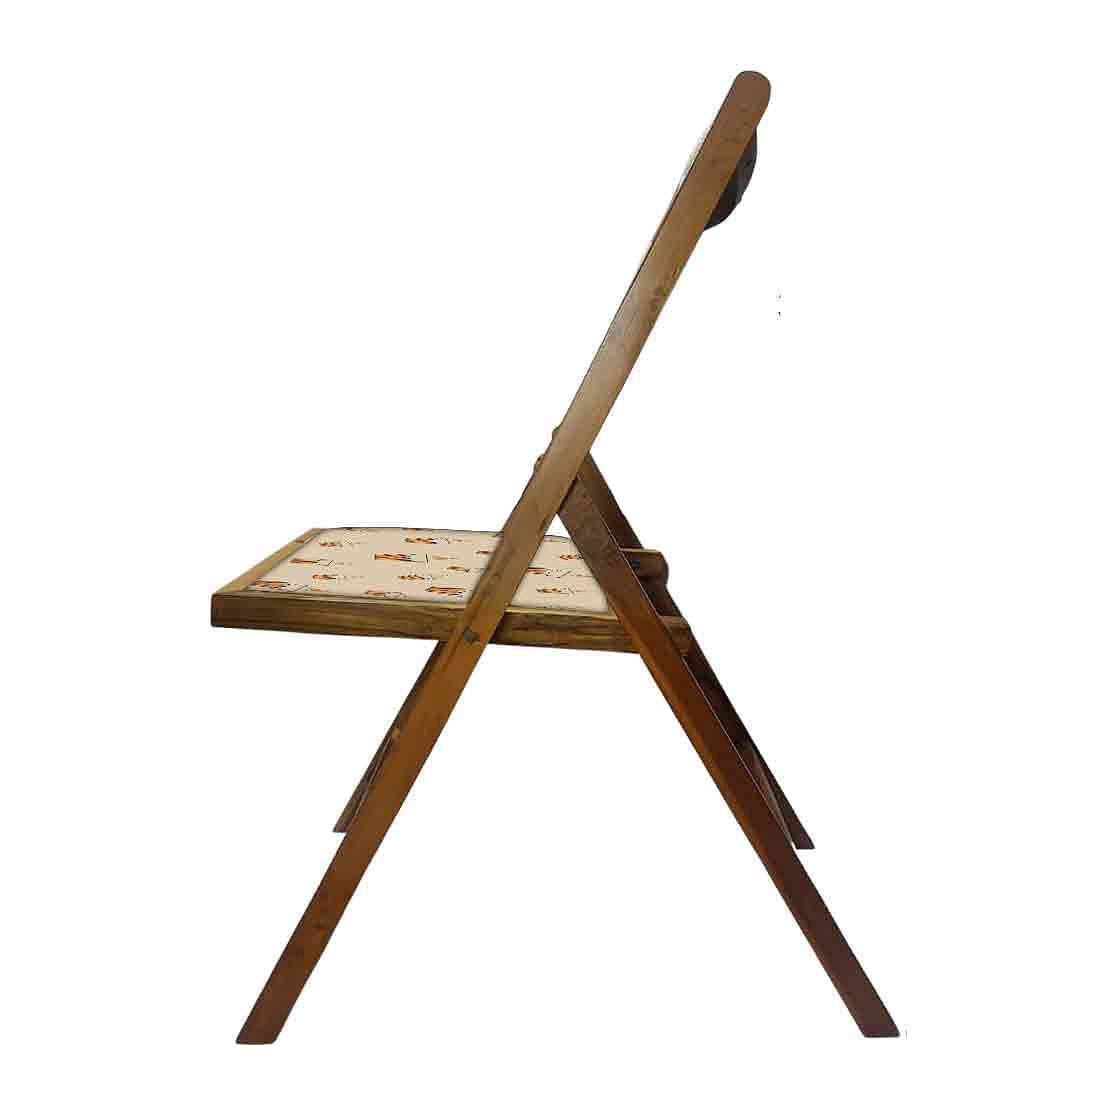 Nutcase Wooden Chair with Cushion For Living Room - Hot Tea Nutcase